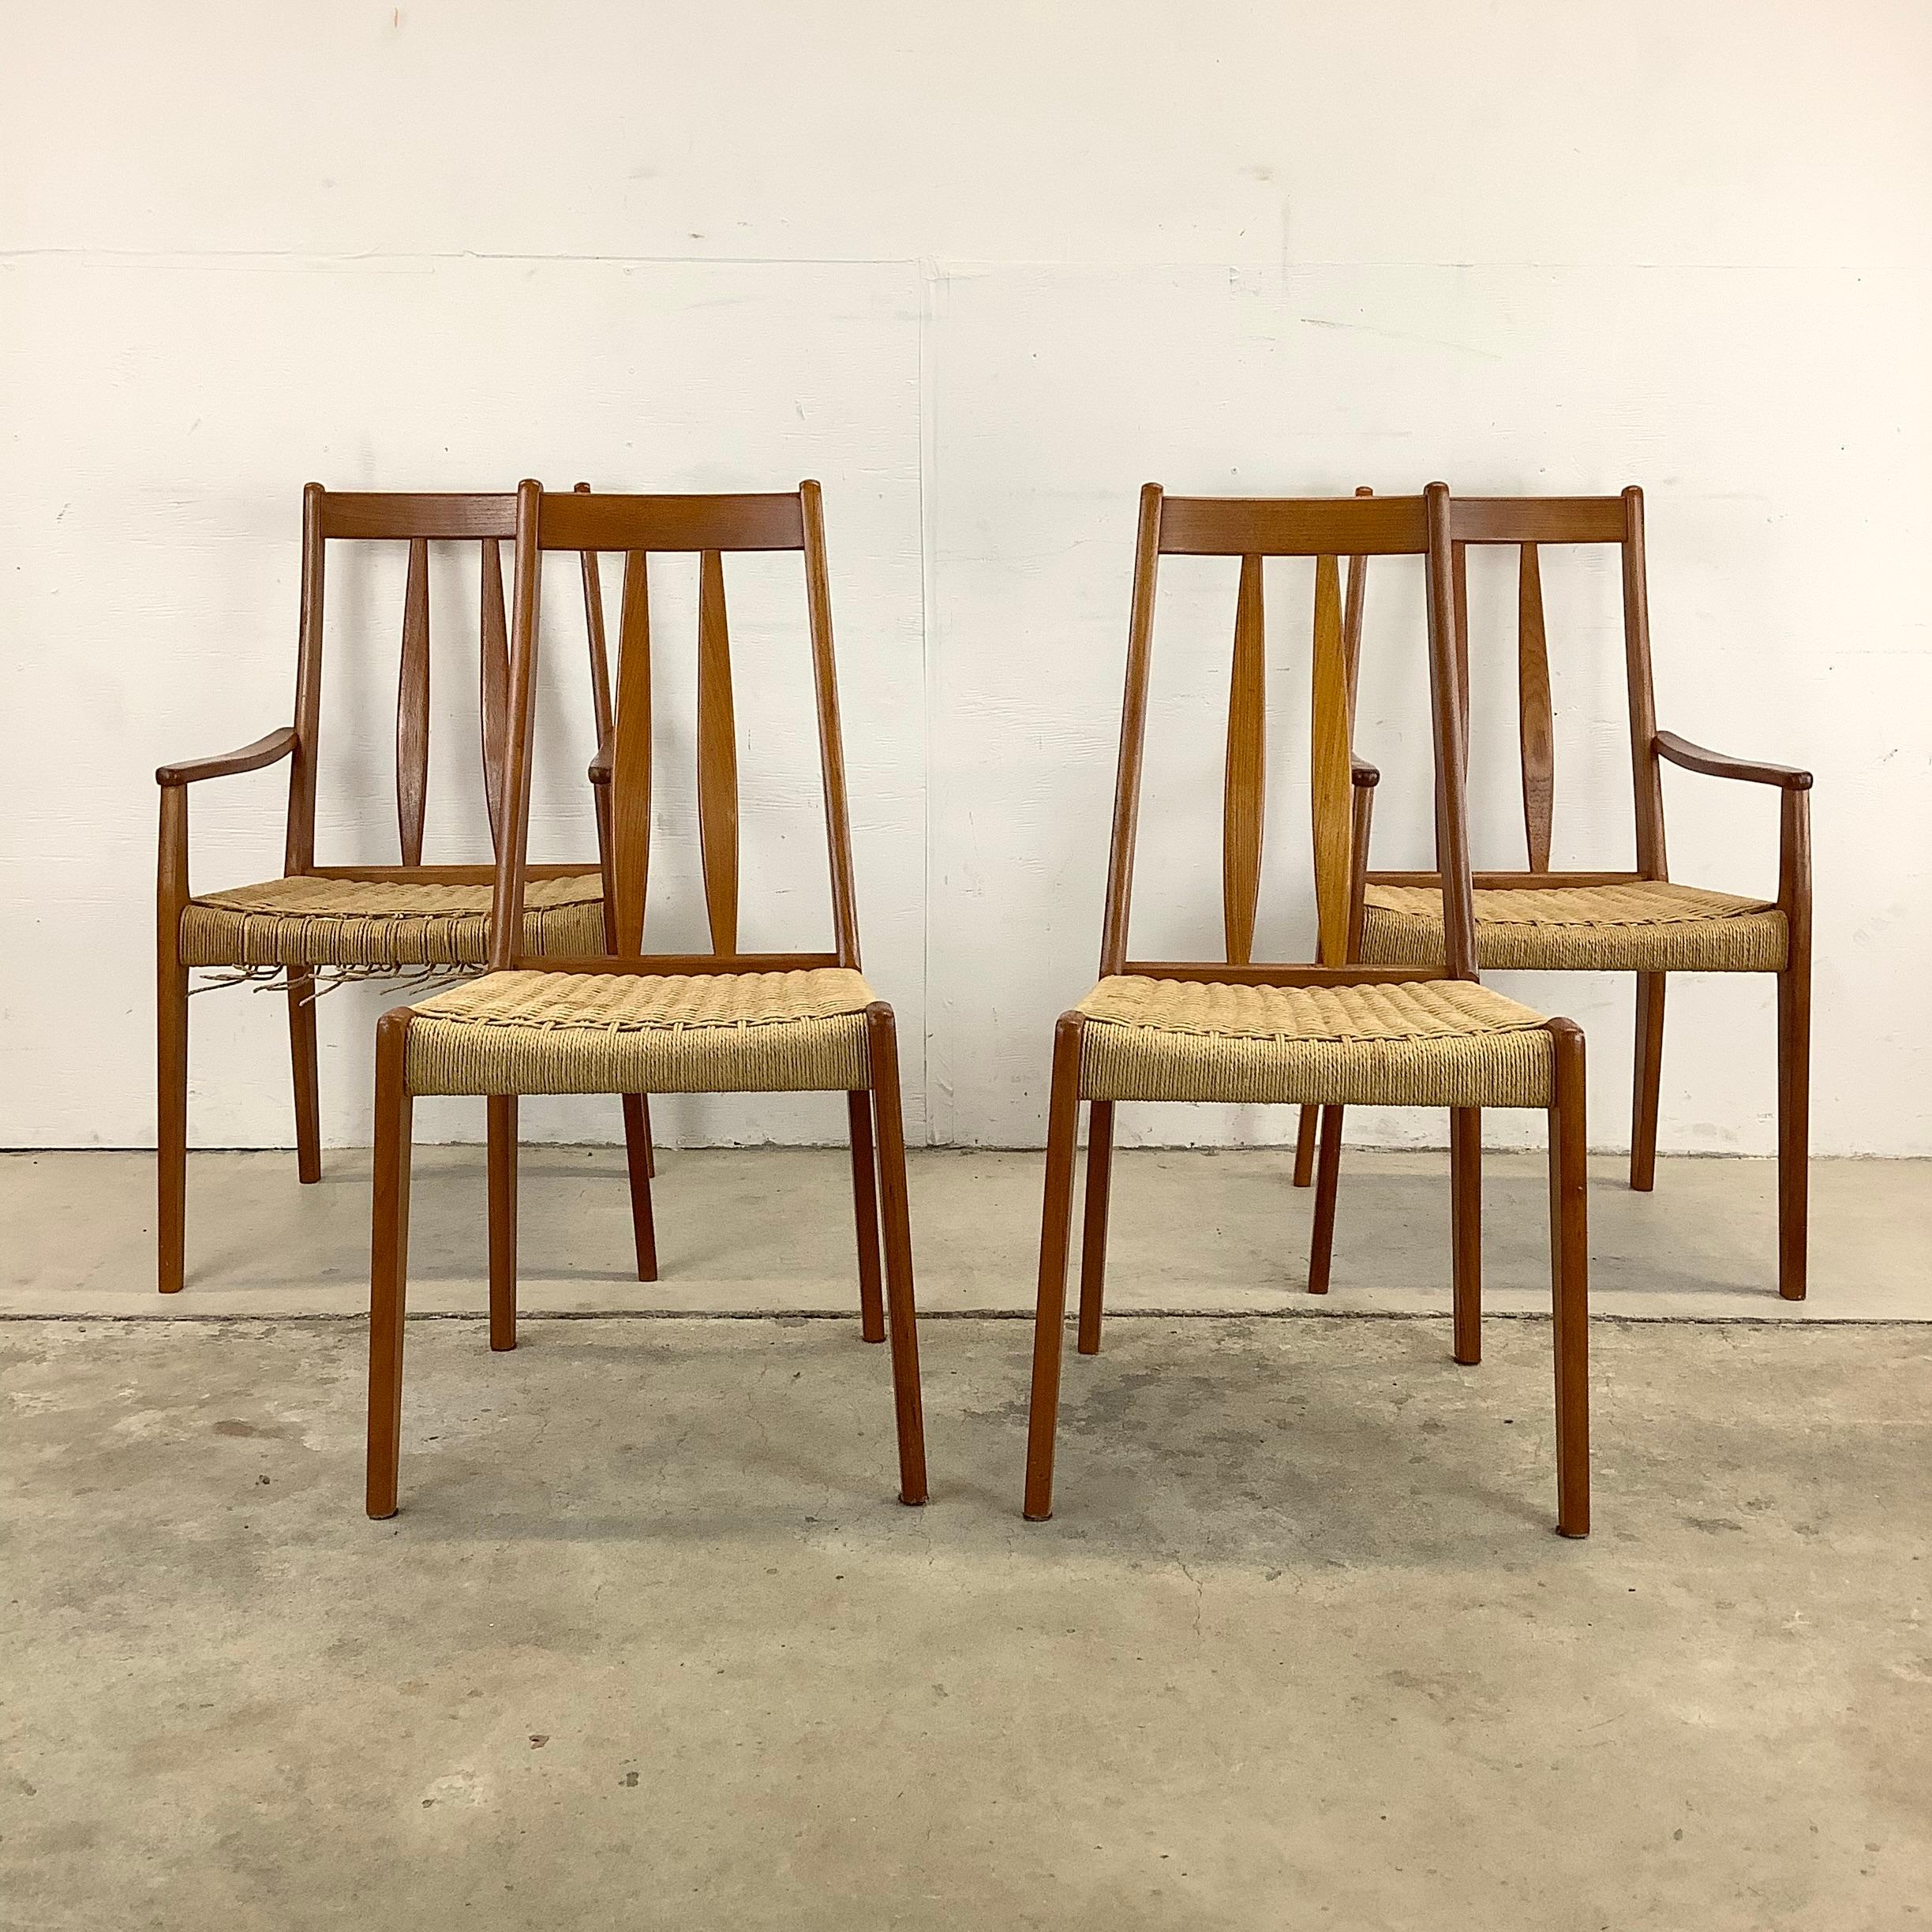 This striking set of four Scandinavian Modern teak dining chairs feature unique Mid-Century Modern design with vintage rope seats and sculpted slat seat backs. Comfortable matching set includes two armchairs and two side chairs- perfect set for